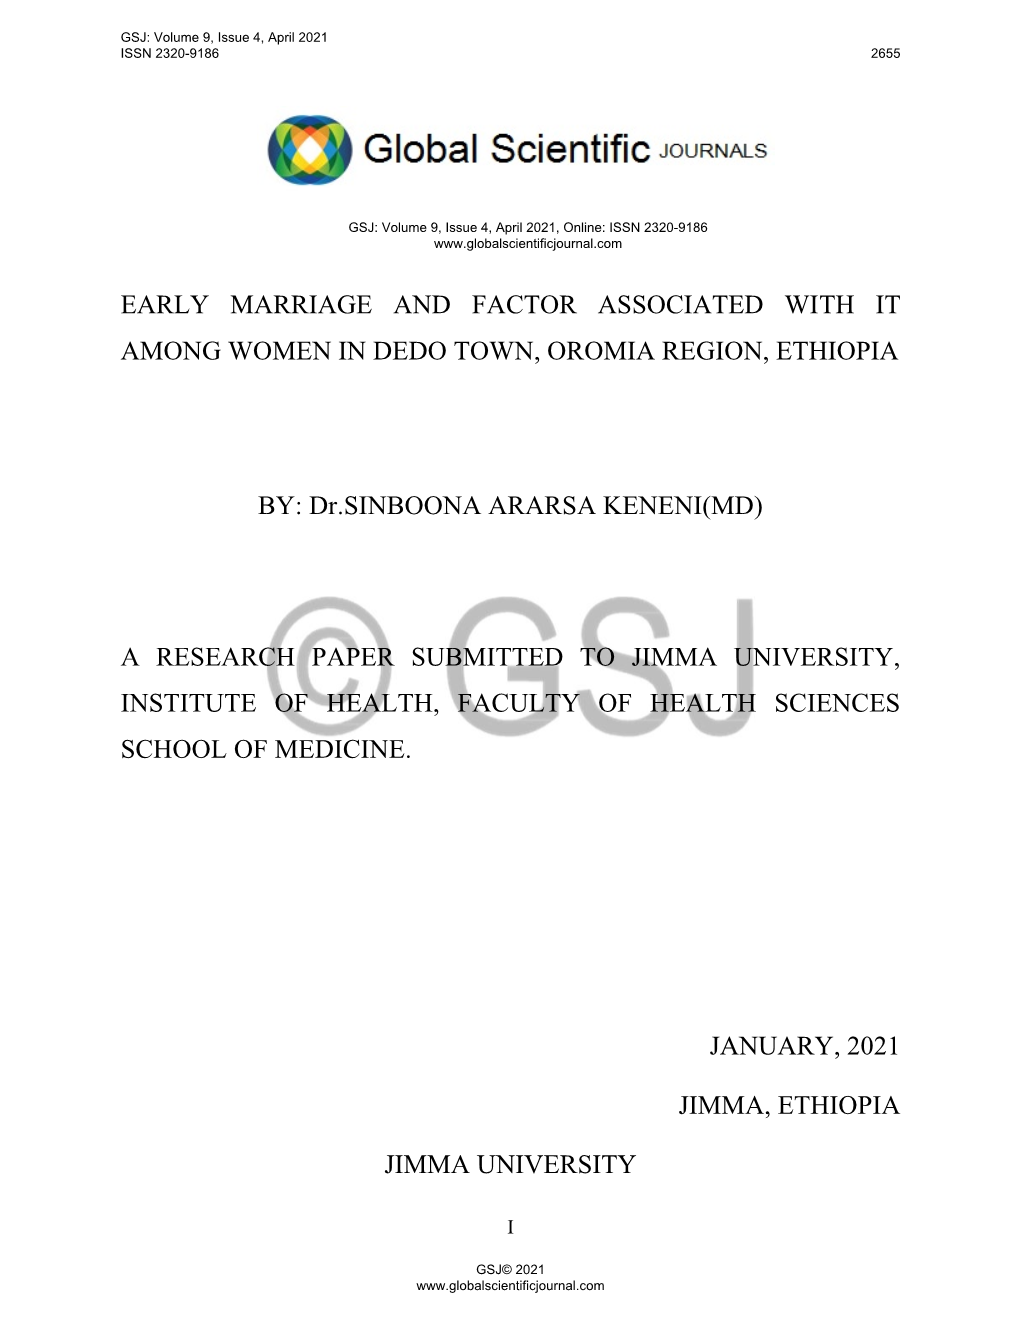 Early Marriage and Factor Associated with It Among Women in Dedo Town, Oromia Region, Ethiopia